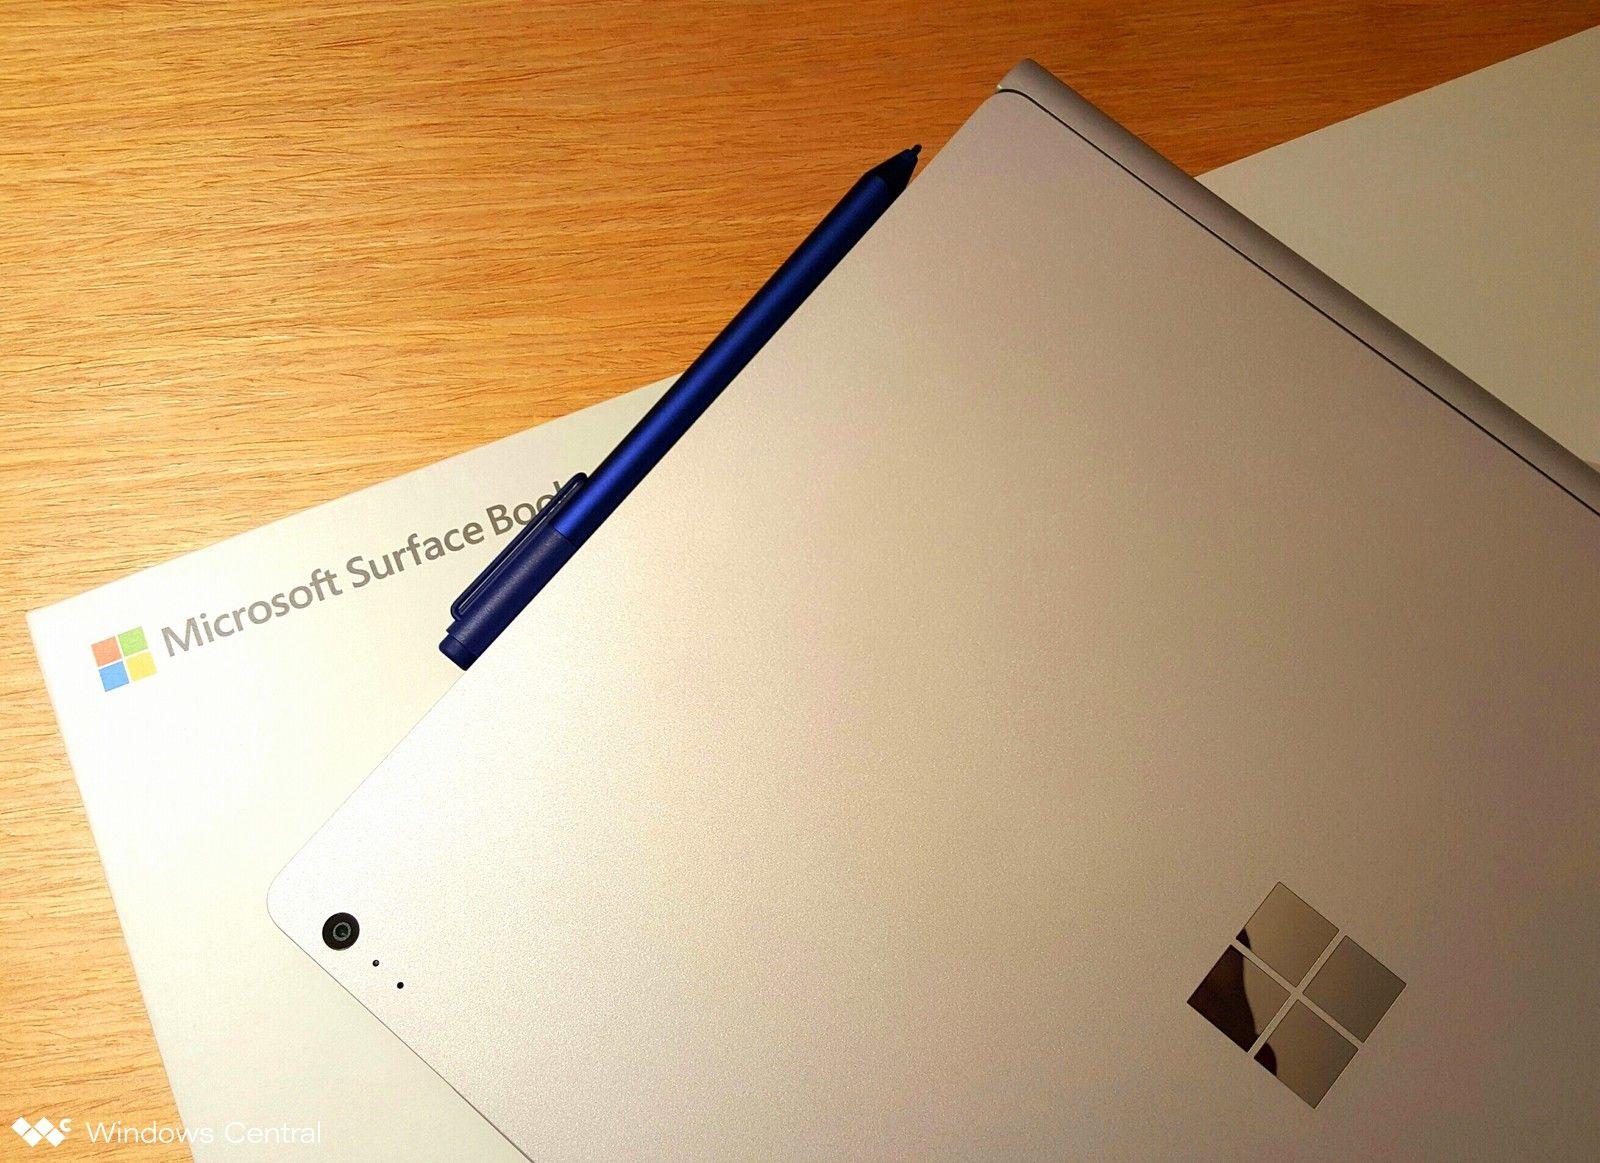 Microsoft Surface Pro 4 Logo - Surface Pro 4 and Surface Book user guides and recovery image ...